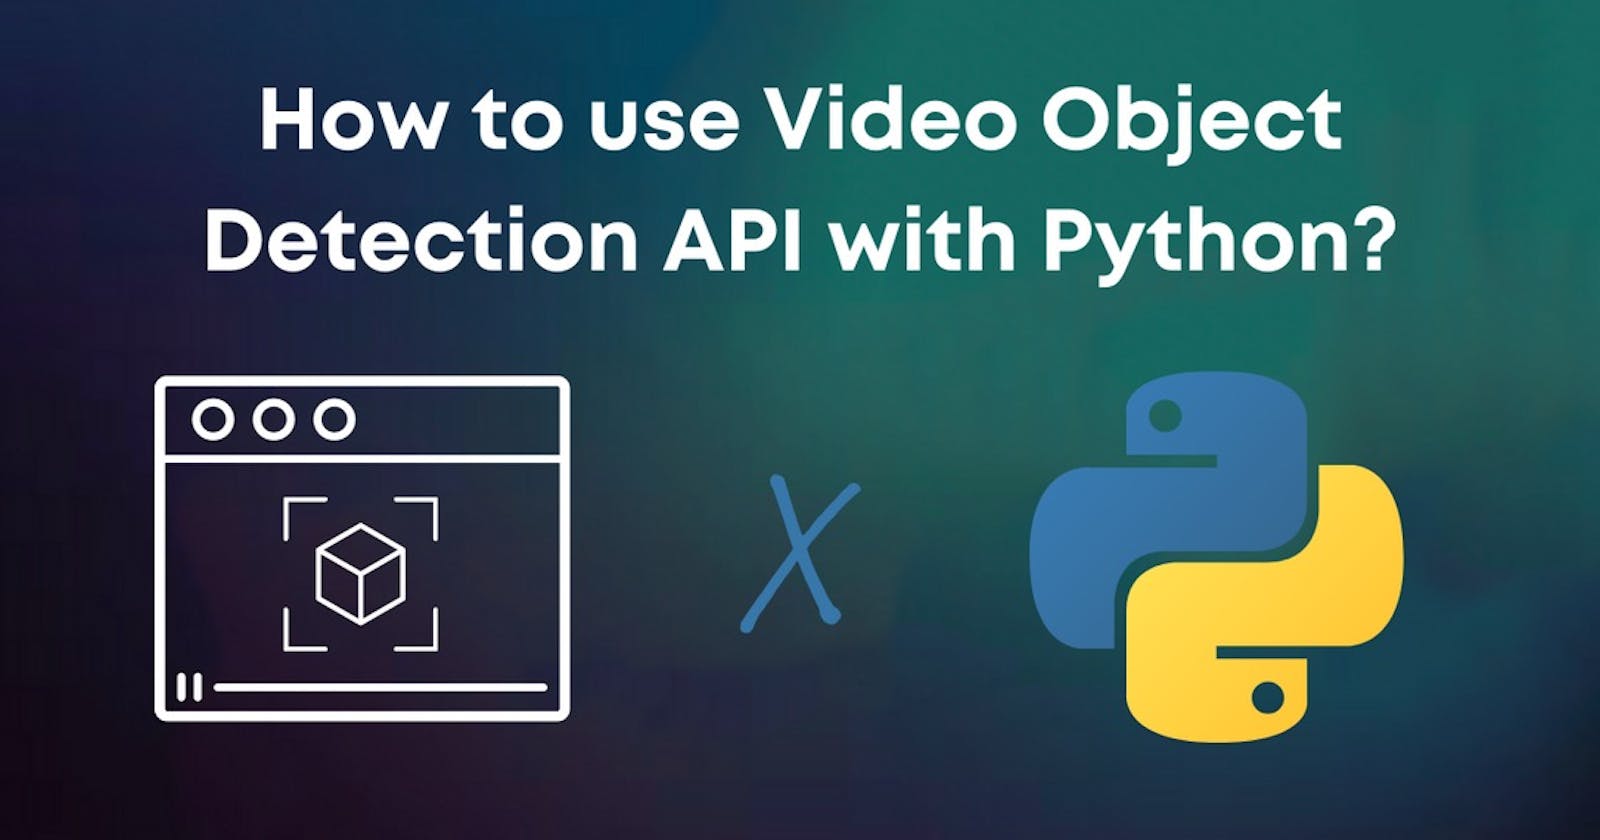 How to Detect Objects in Video with Python?